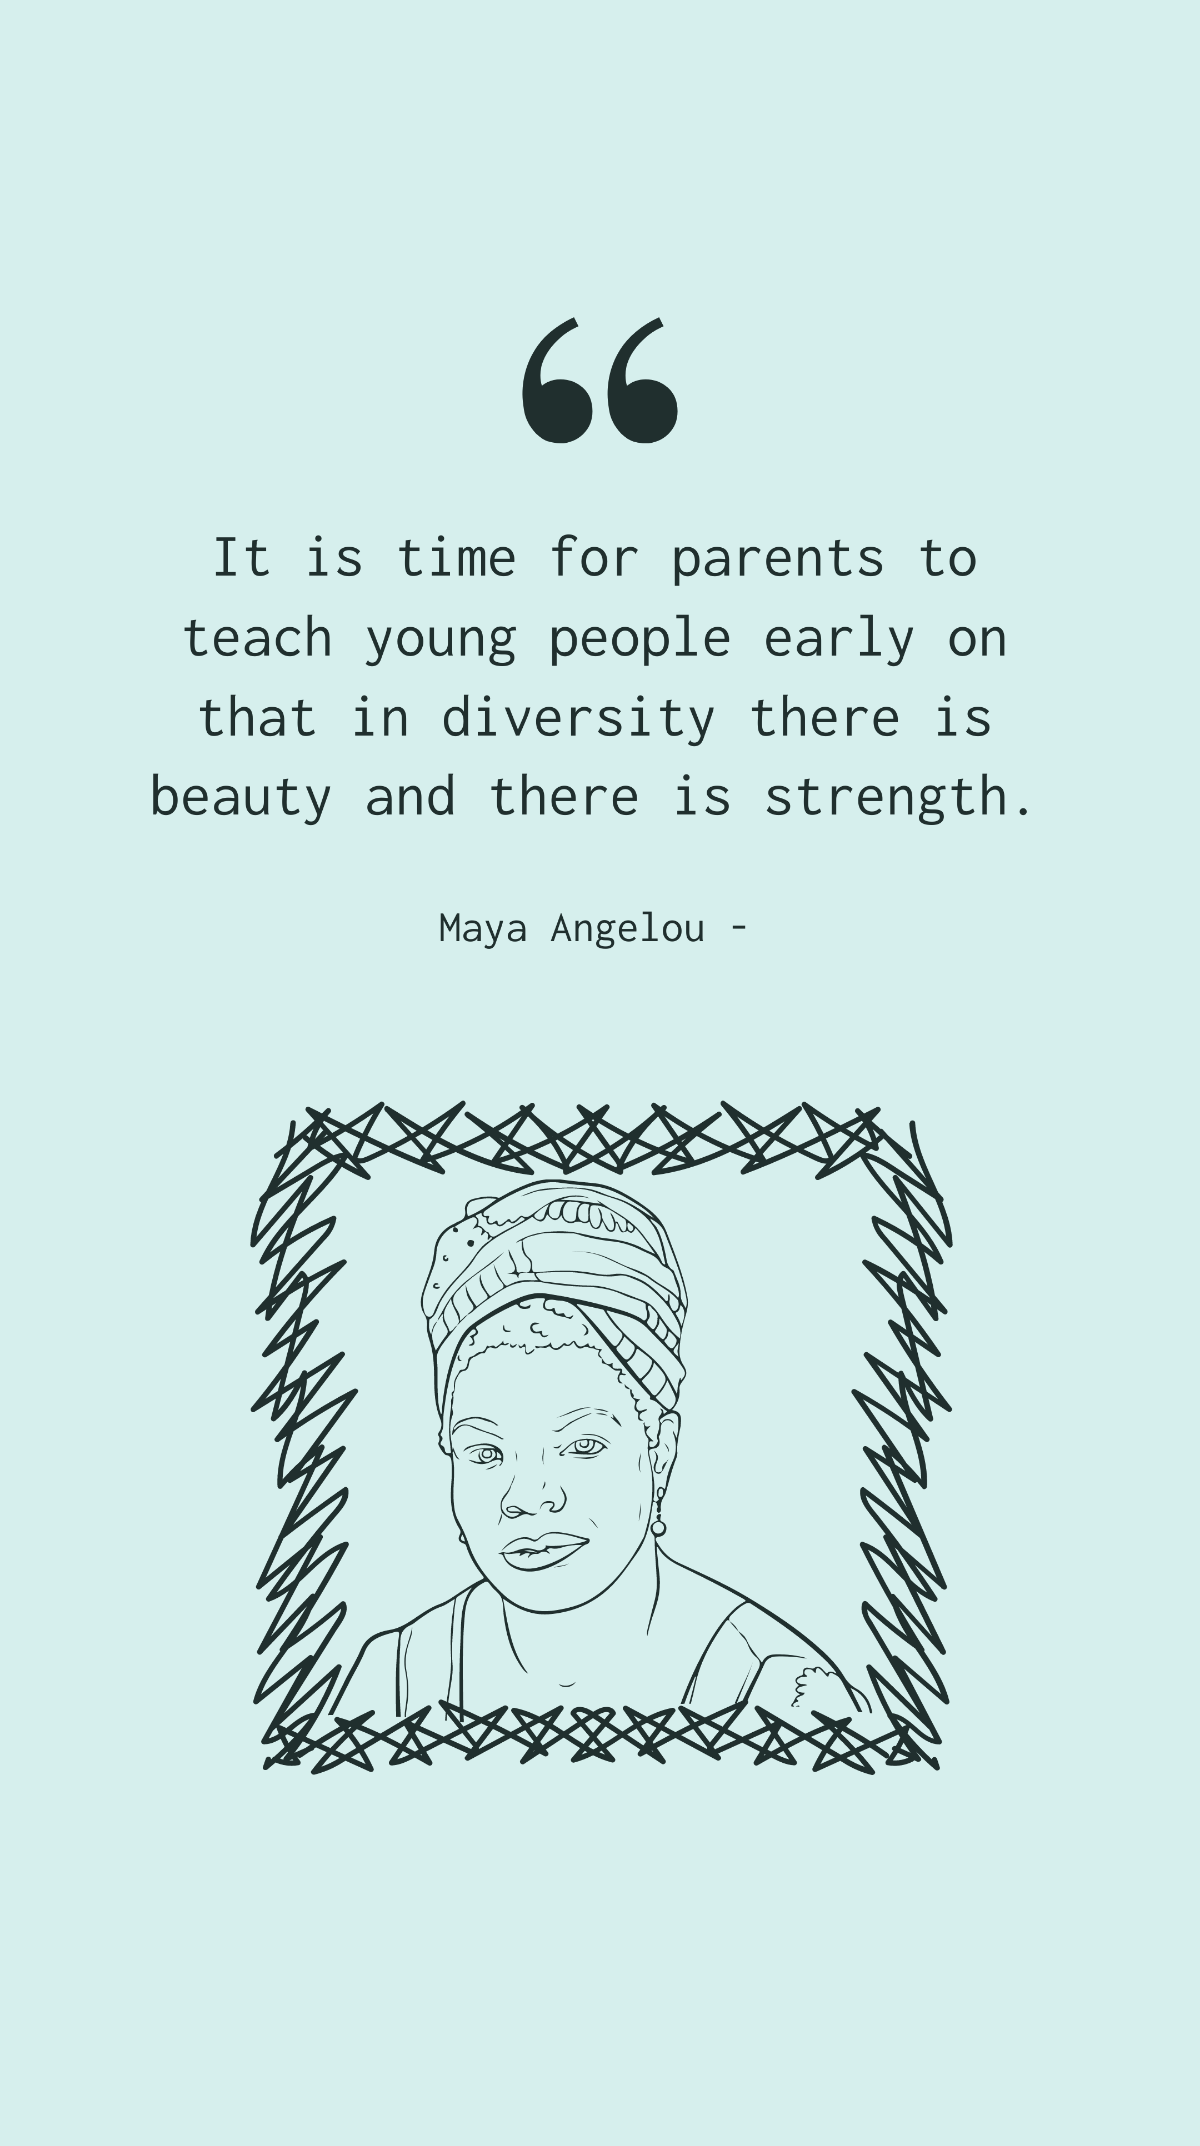 Maya Angelou - It is time for parents to teach young people early on that in diversity there is beauty and there is strength.